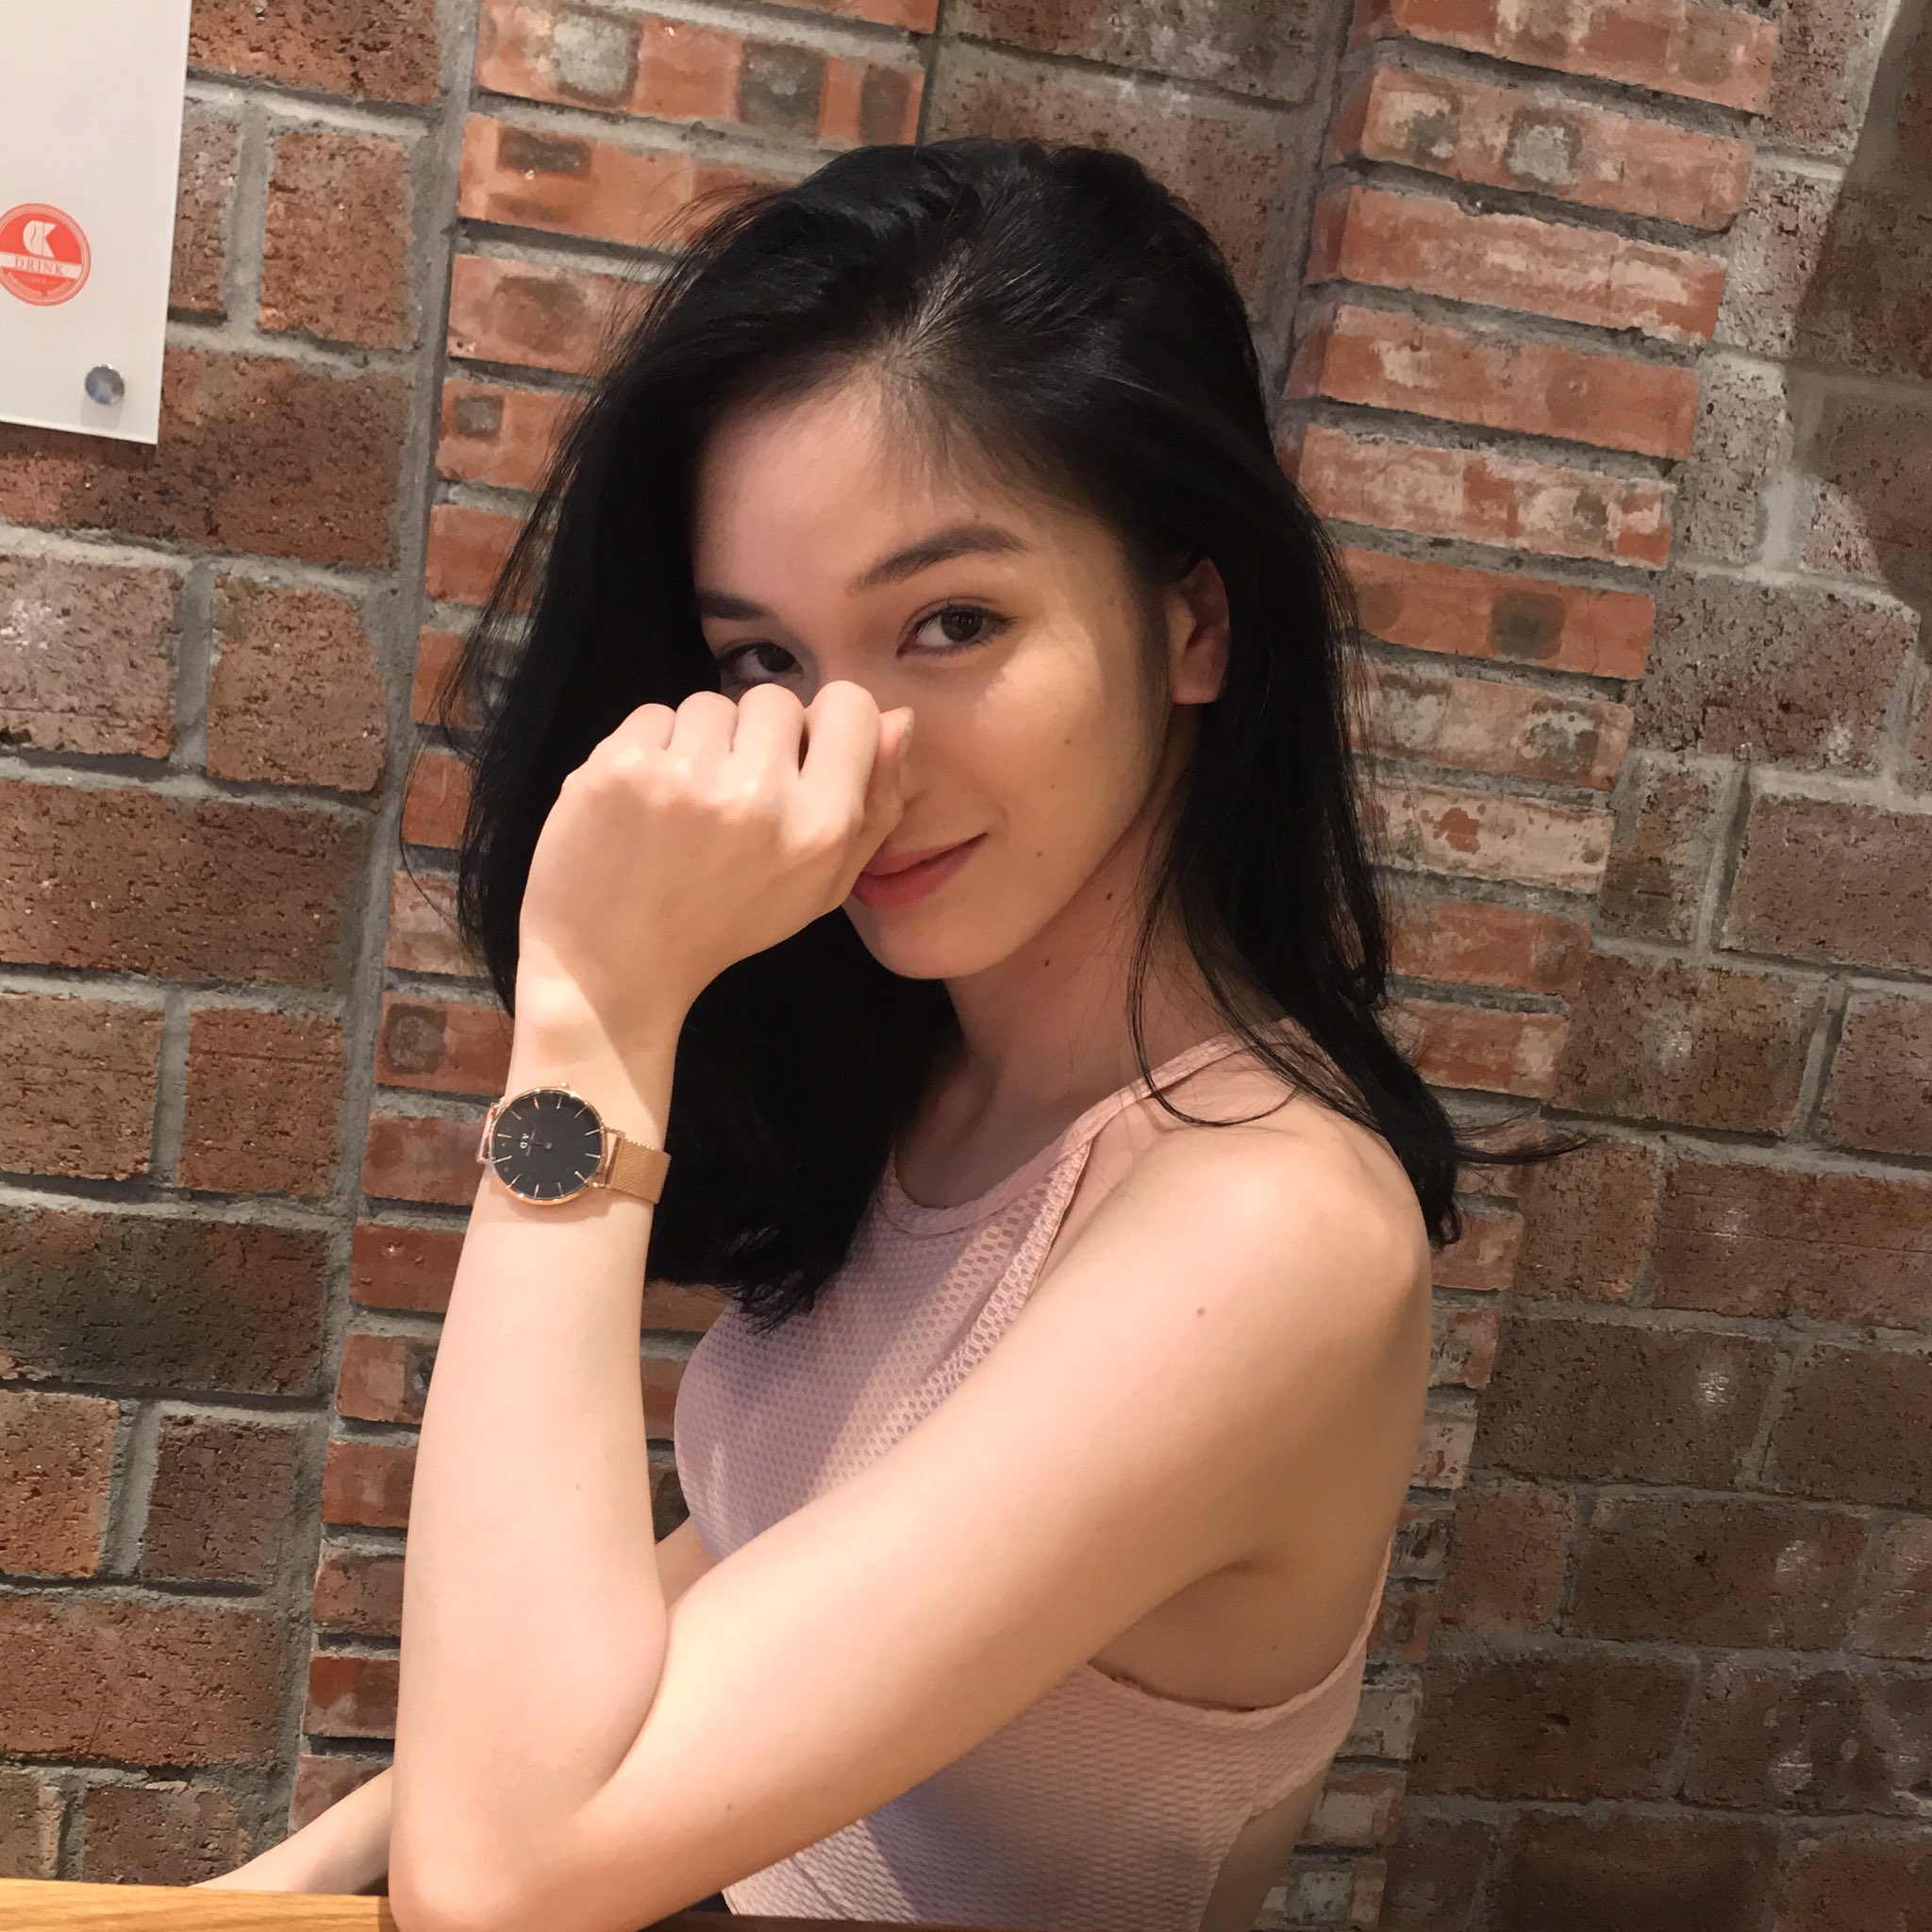 Sommerhus tavle spyd The girl named Kevin. on Twitter: "Im so inlove with my new @ danielwellington, were worn by Kendall Jenner! Get yours too 15%discount by  using 17BALOT https://t.co/ZYQ9k6bm0m https://t.co/mIGwls1dtZ" / Twitter